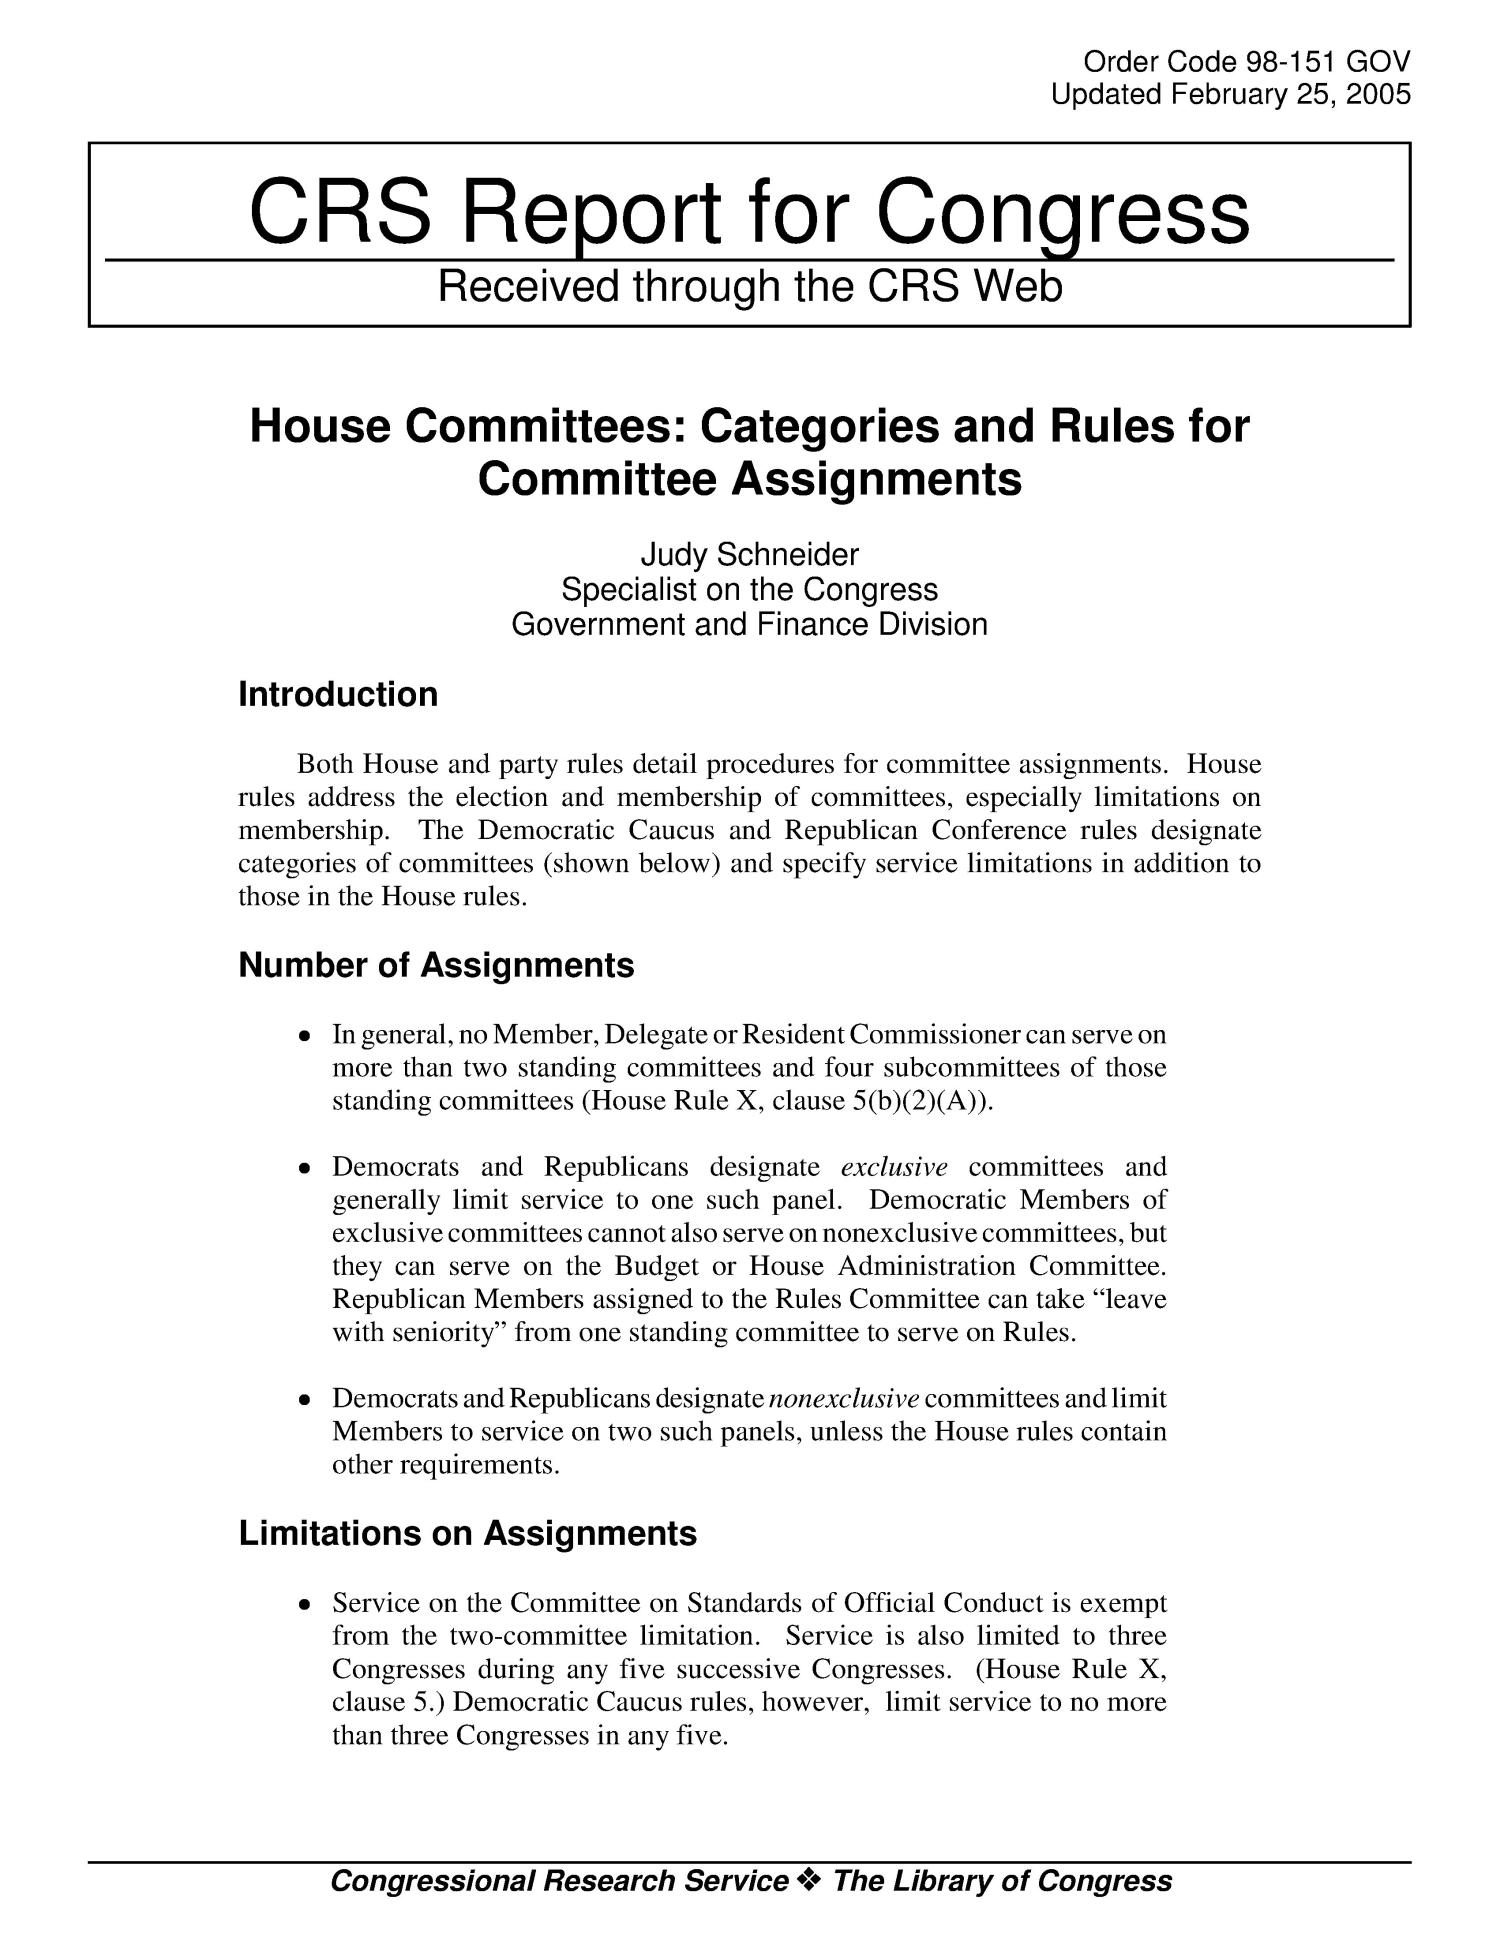 nh house committee assignments